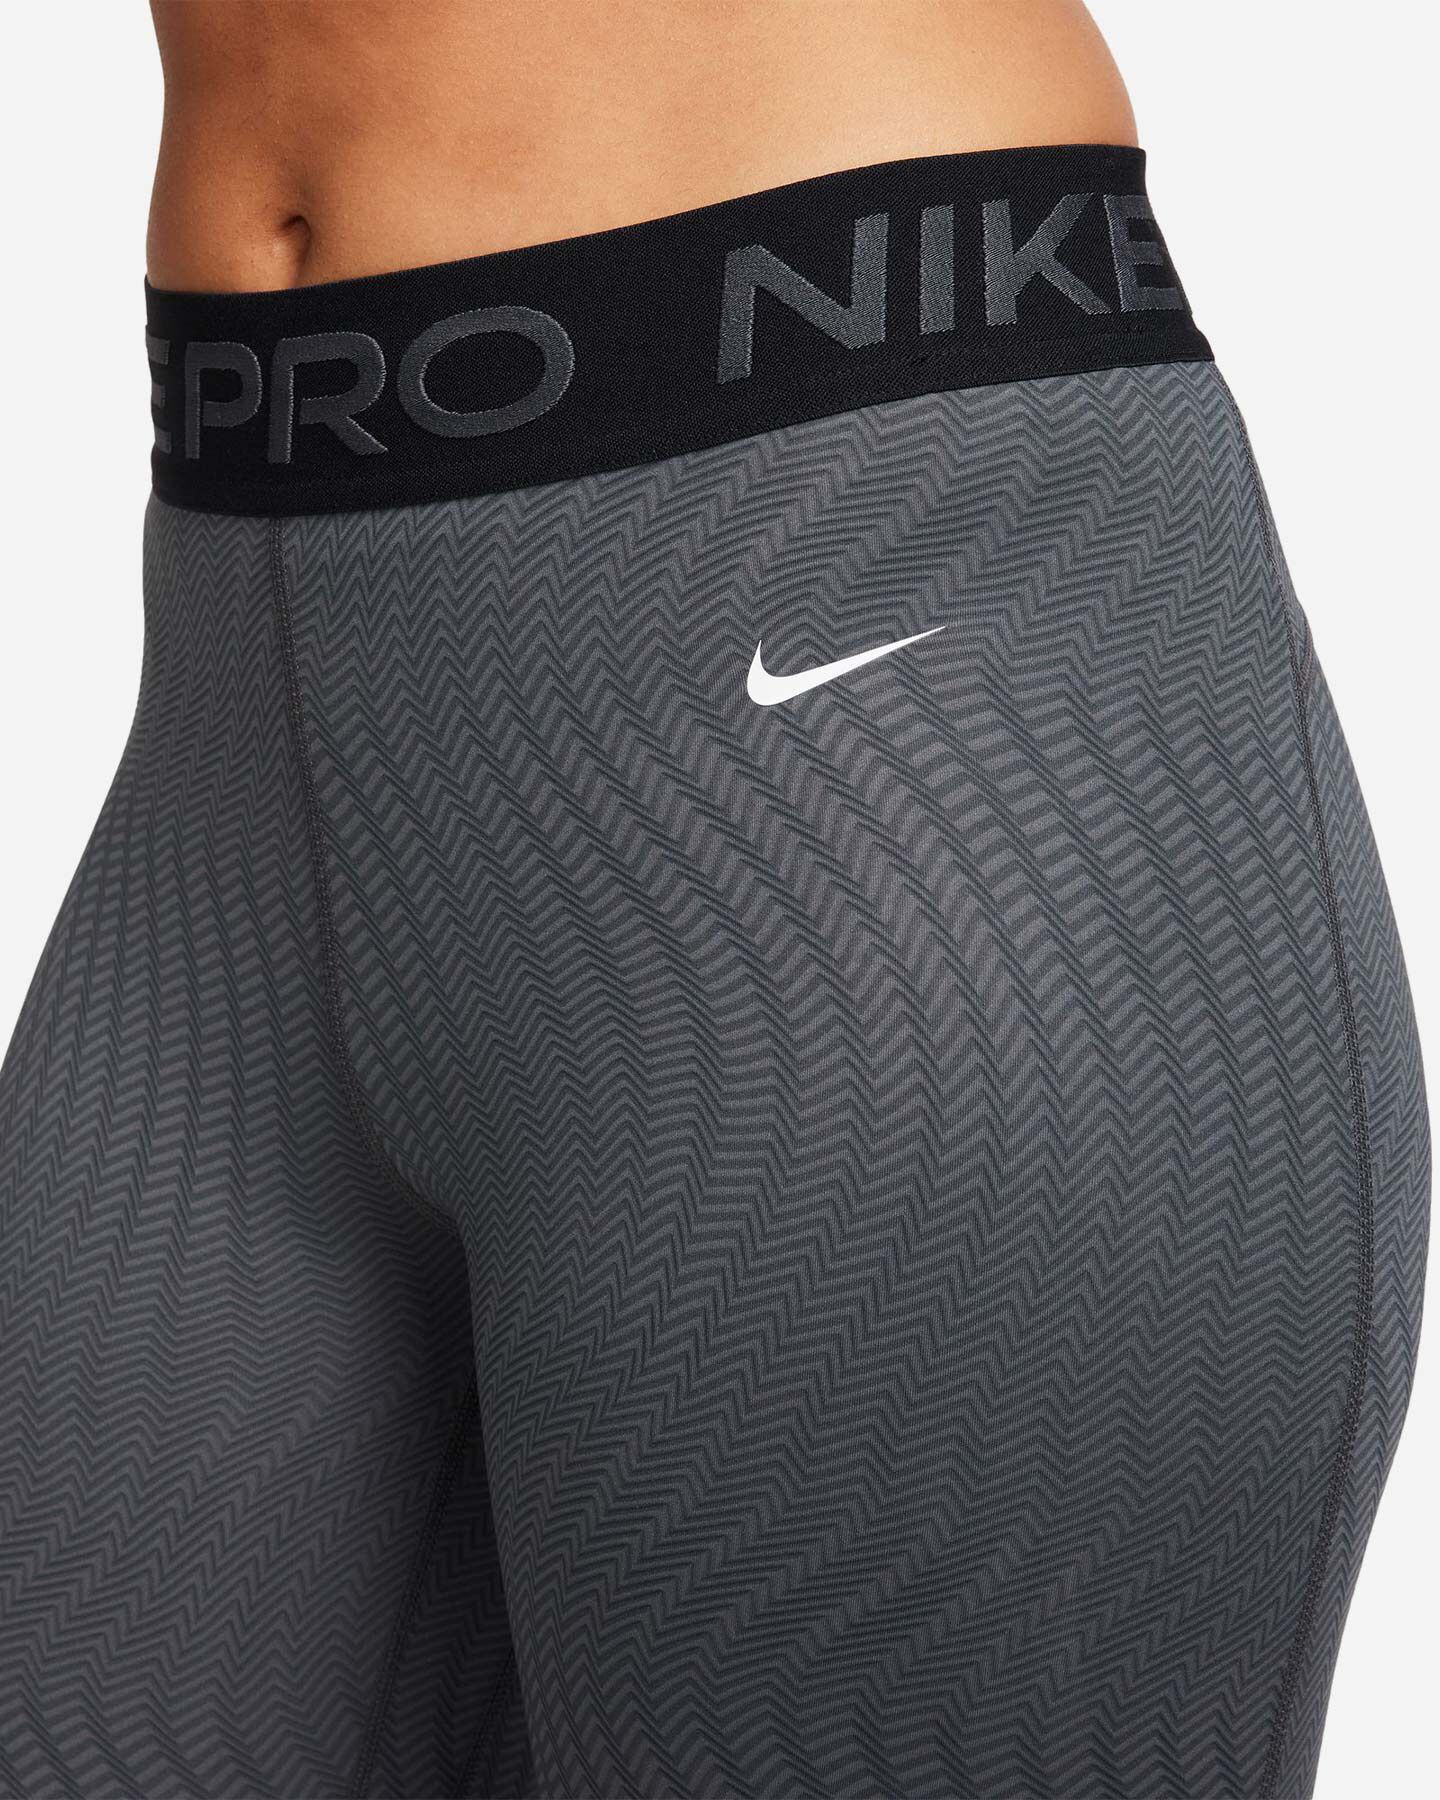  Leggings NIKE PRO ALL OVER PRINTED W S5644775|060|XS scatto 3